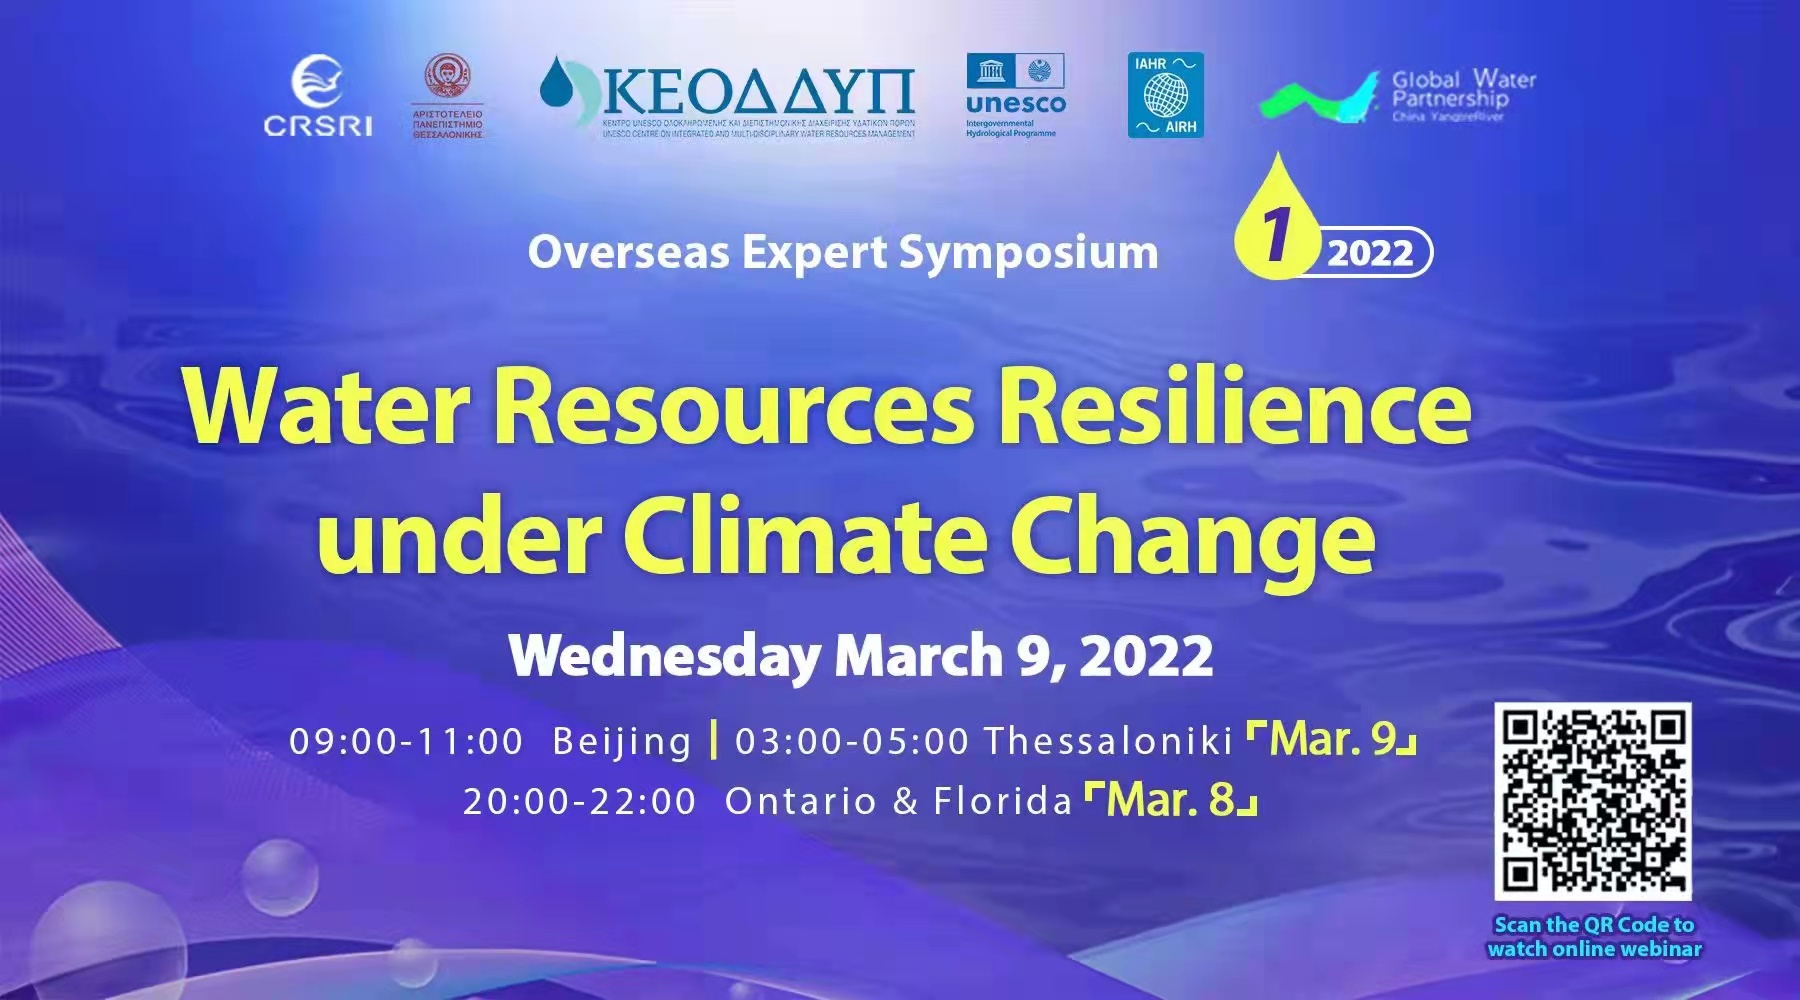 Webinar on water resources resilience under climate change